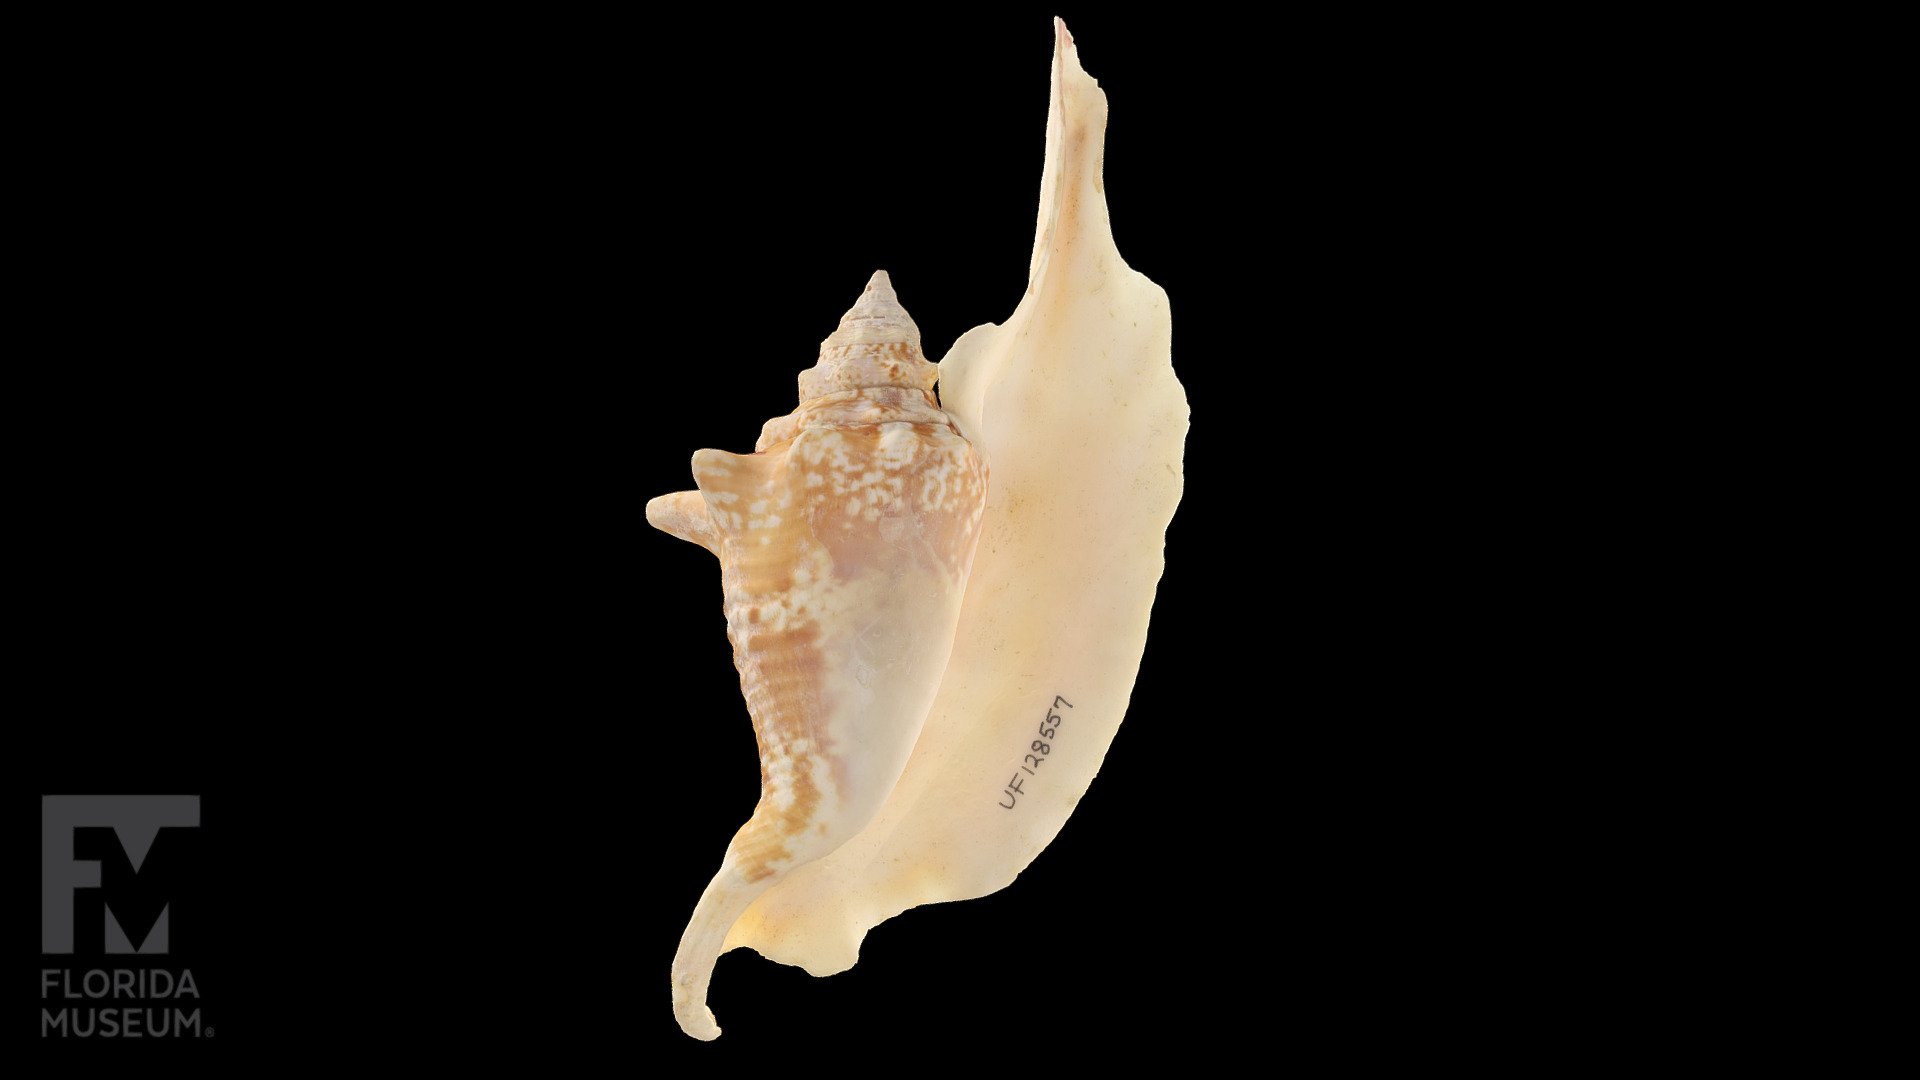 Roostertail Conch, Strombus gallus, (Family Strombidae) from the Florida Museum of Natural History Invertebrate Zoology collection (UF IZ 128557). Collected from Palm Beach County, Florida, USA.

Photogrammetry scan by the Florida Museum Digital Imaging Division

Invertebrate Zoology collection page: https://www.floridamuseum.ufl.edu/iz/ - Roostertail Conch Strombus gallus - 3D model by FloridaMuseum 3d model